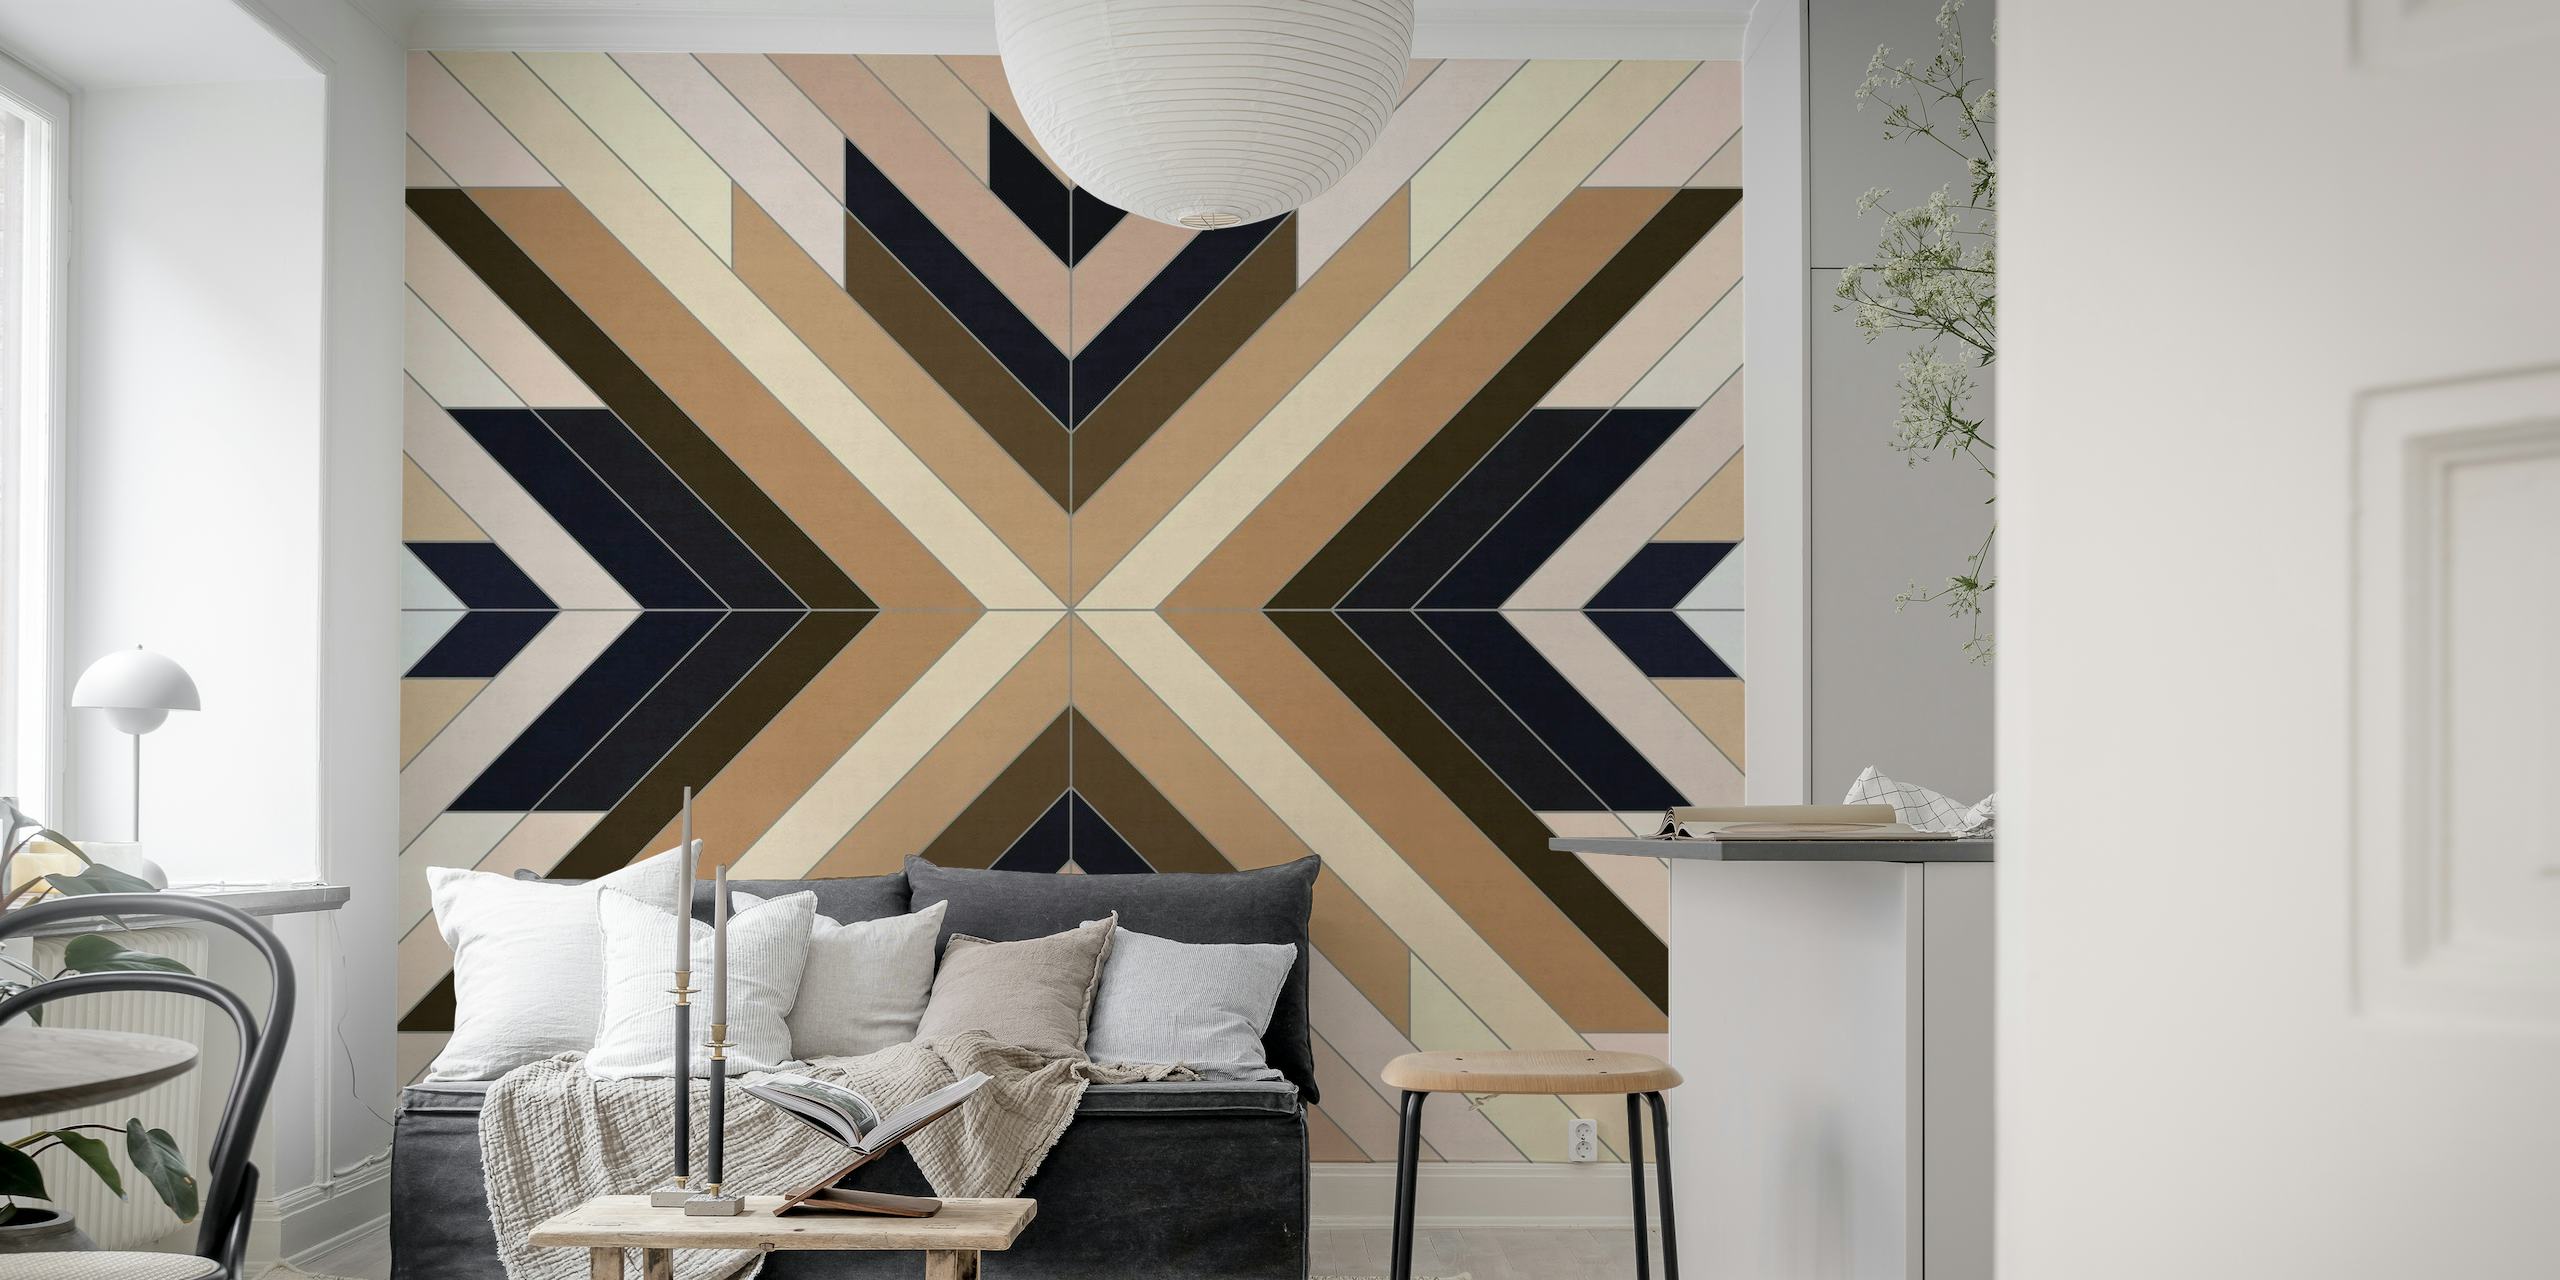 Stylish geometric bands wall mural with a modern pattern of angular lines and contrasting colors